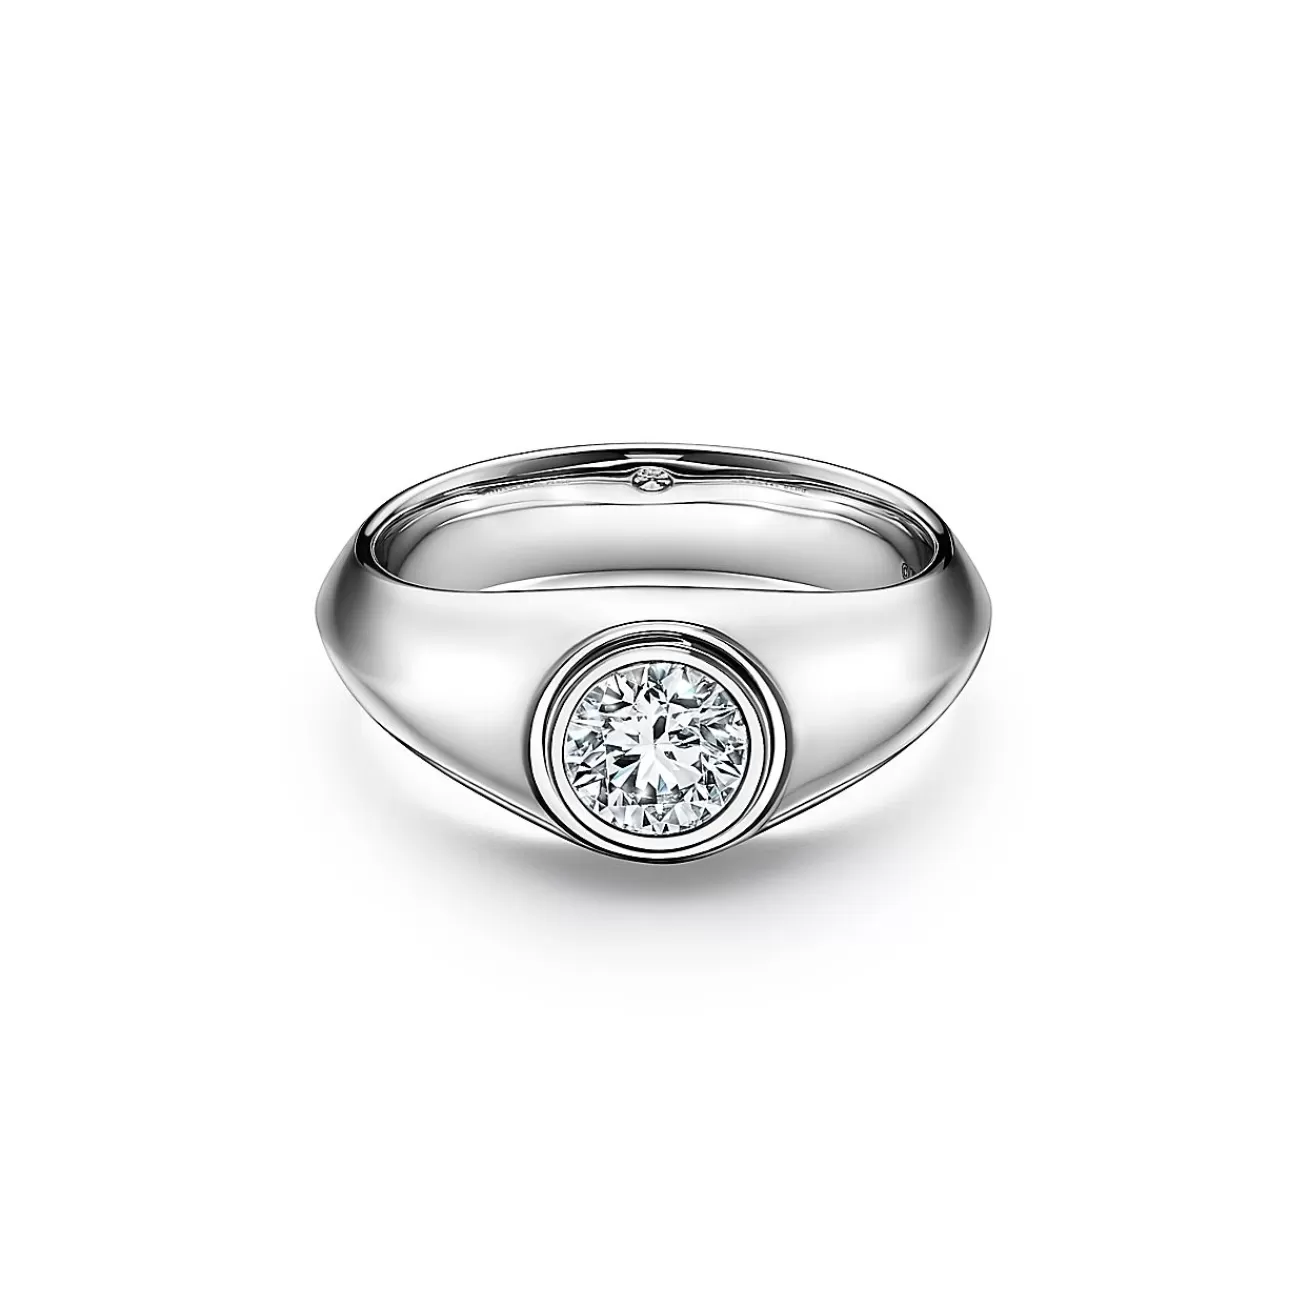 Tiffany & Co. The Charles Tiffany Setting Men's Engagement Ring in Platinum with a Diamond | ^ Men's Jewelry | Engagement Rings